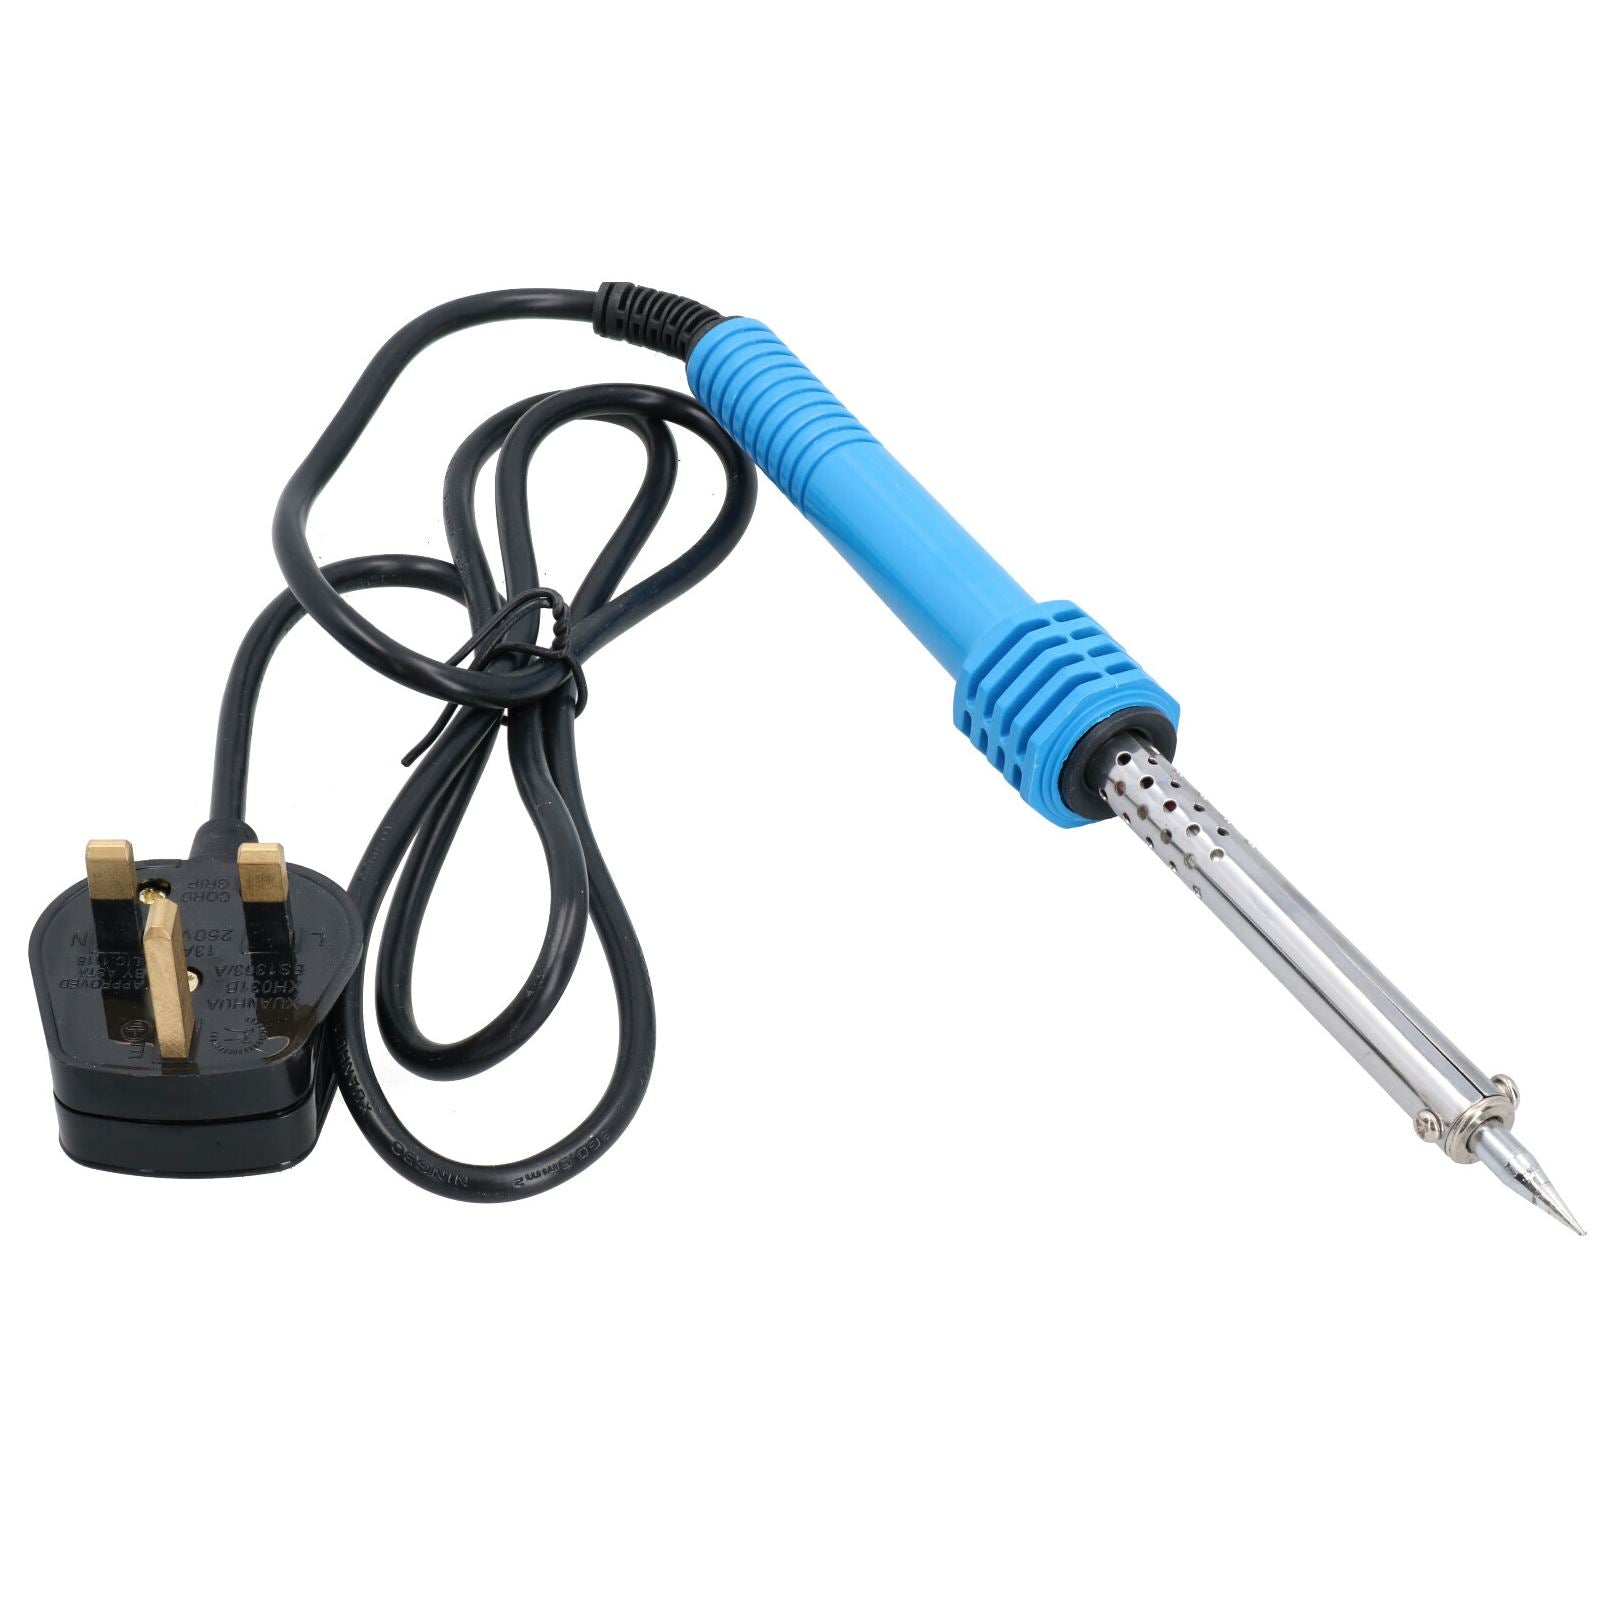 60W Soldering Iron Electric Solder 230v With Copper Tip By BERGEN AT307